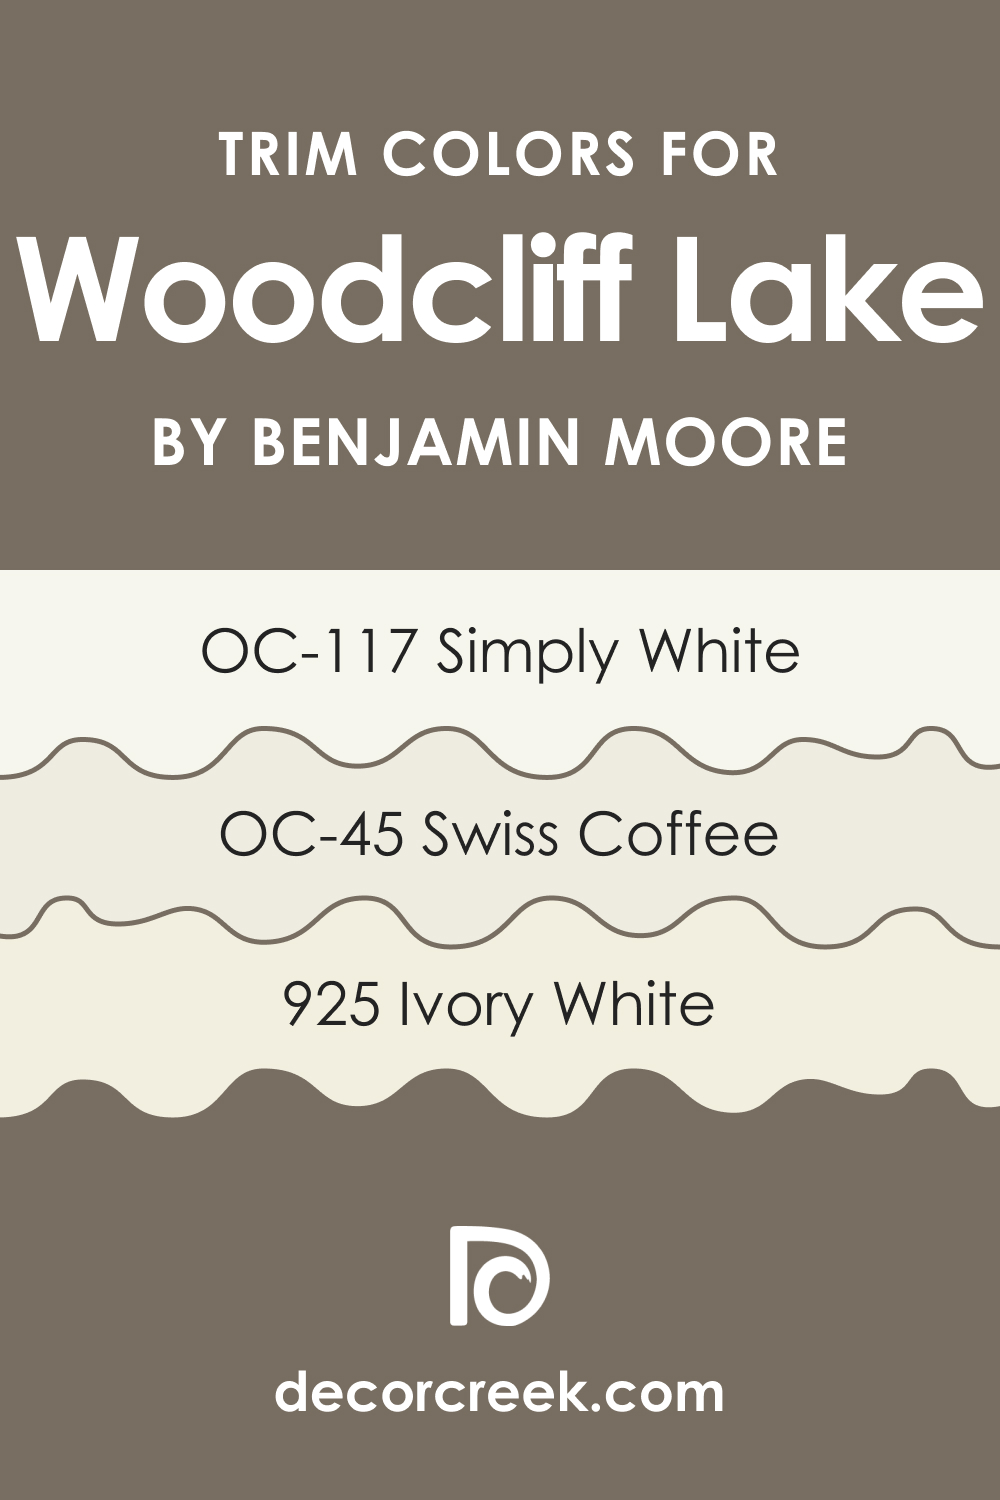 Trim Colors of Woodcliff Lake 980